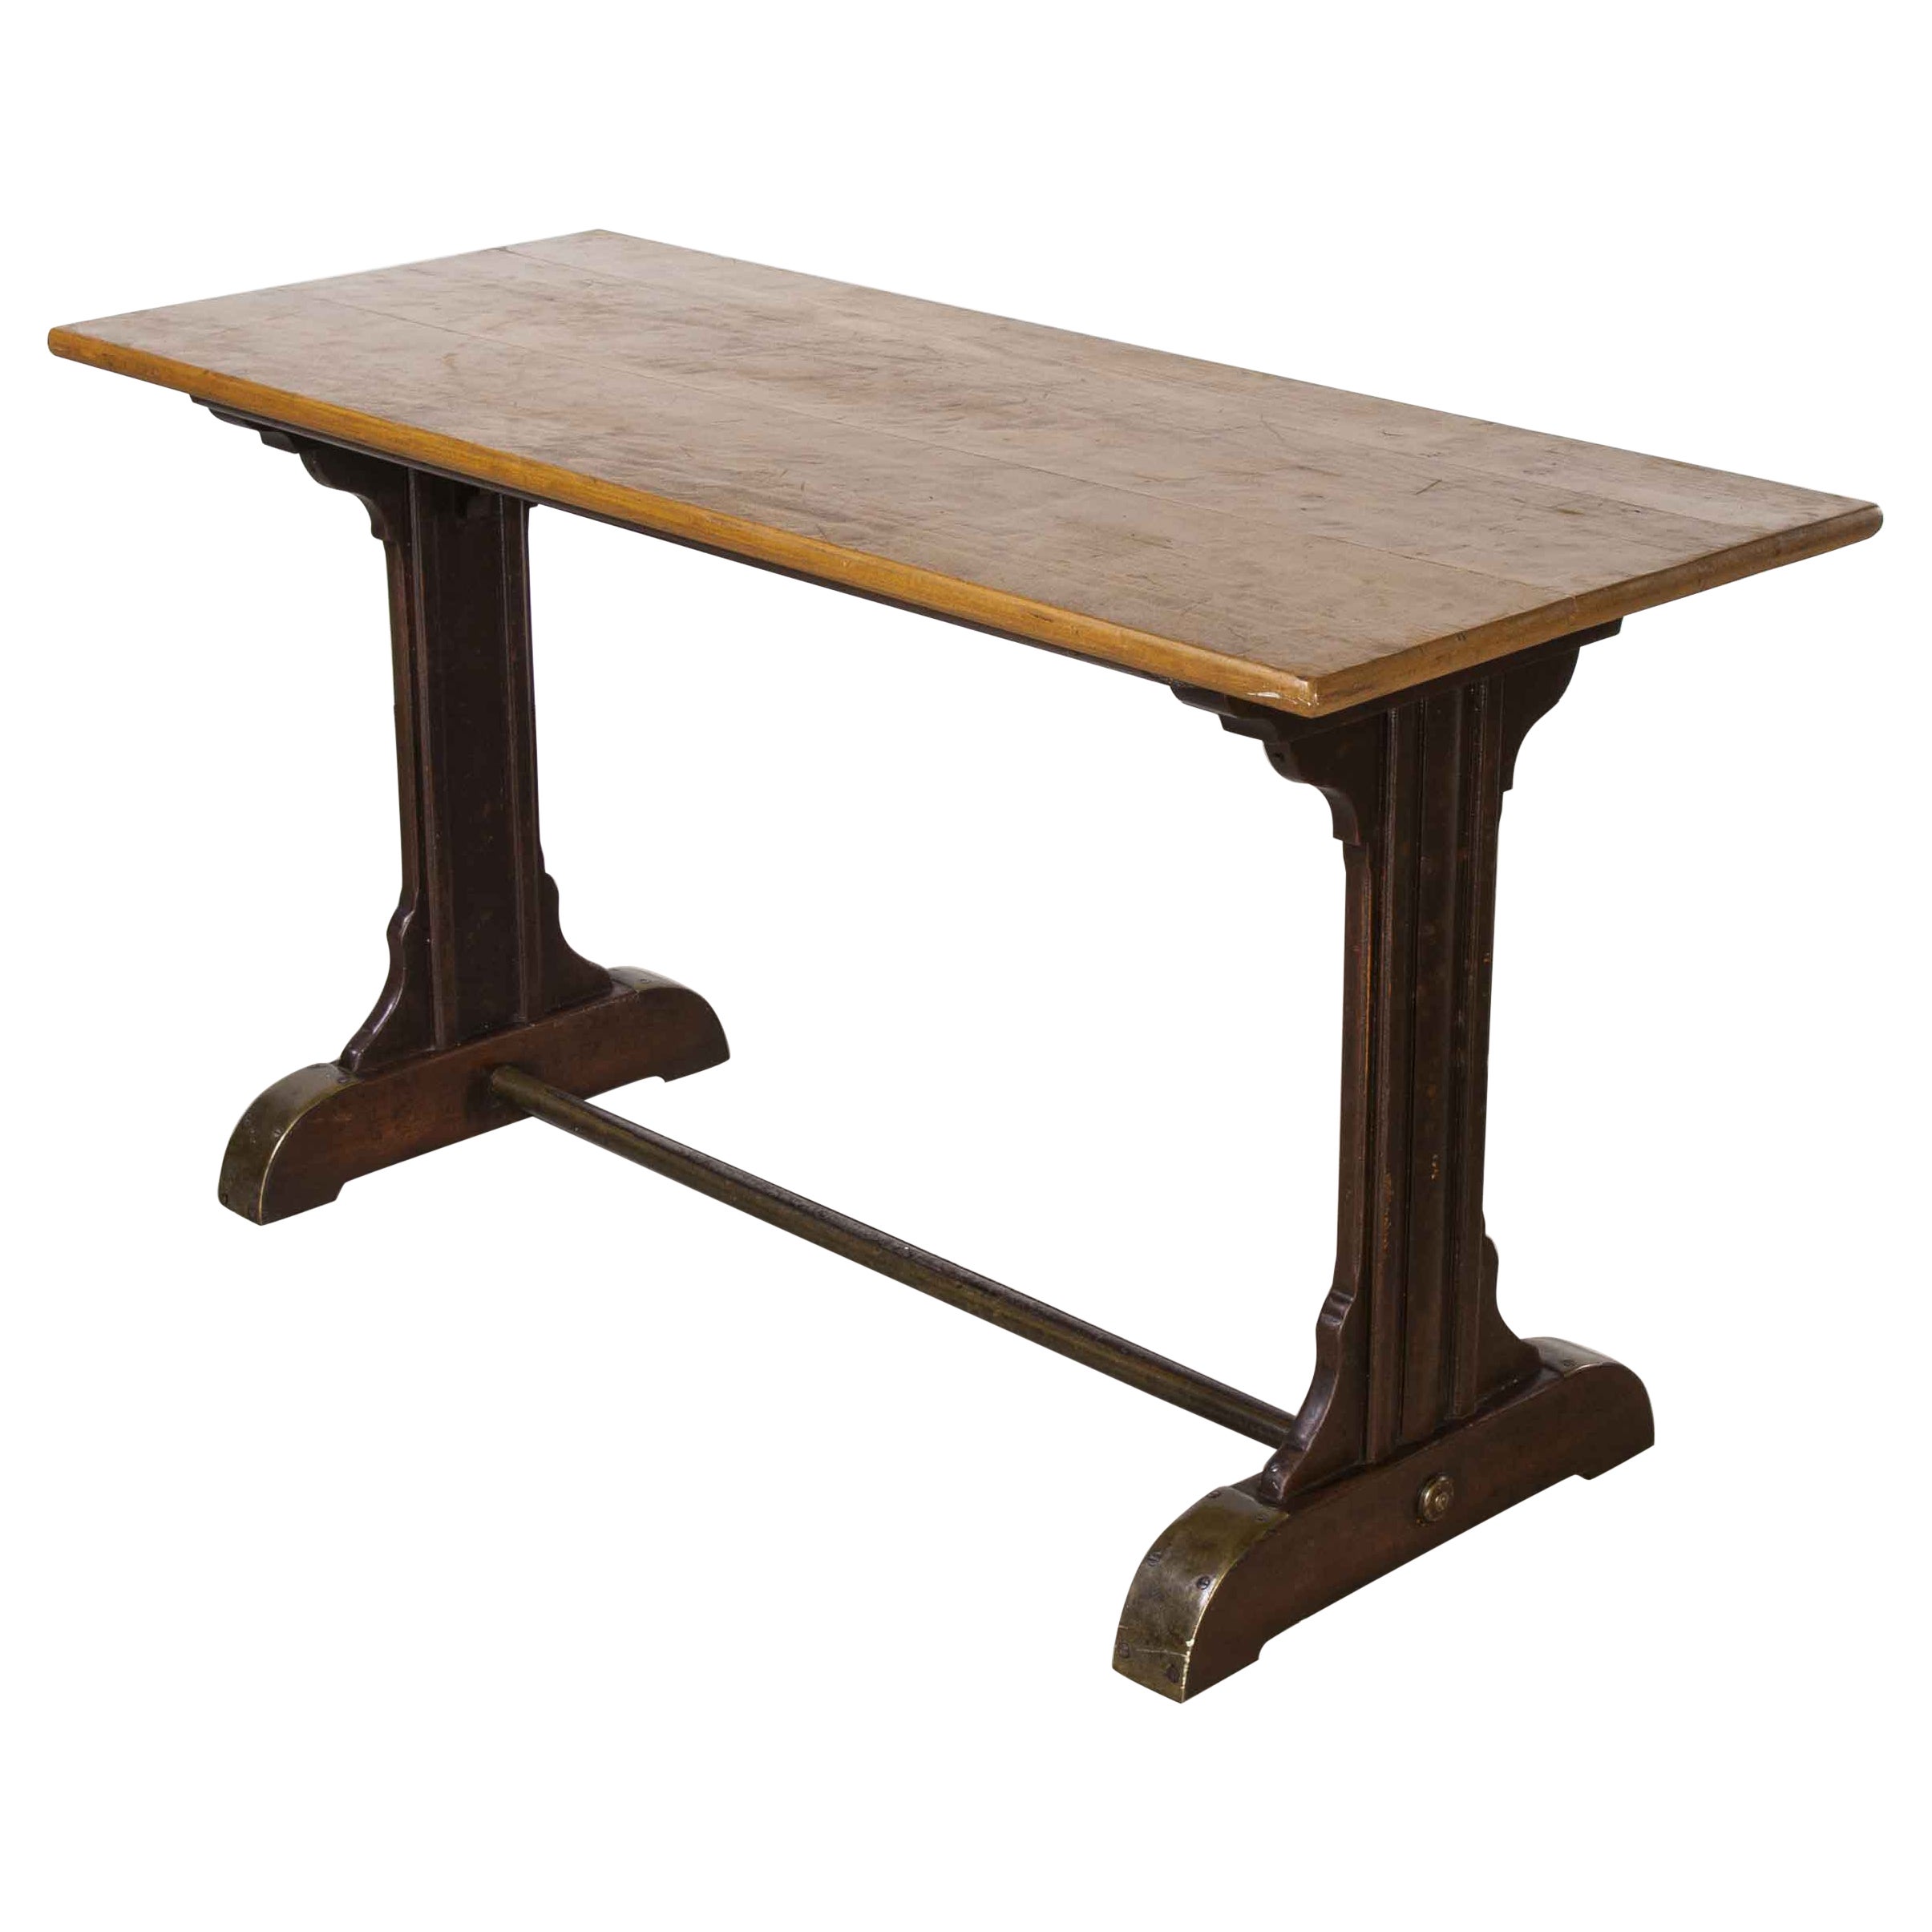 1930's Original French Café Table, Rectangular Dining Table 'Model 1114.2' For Sale